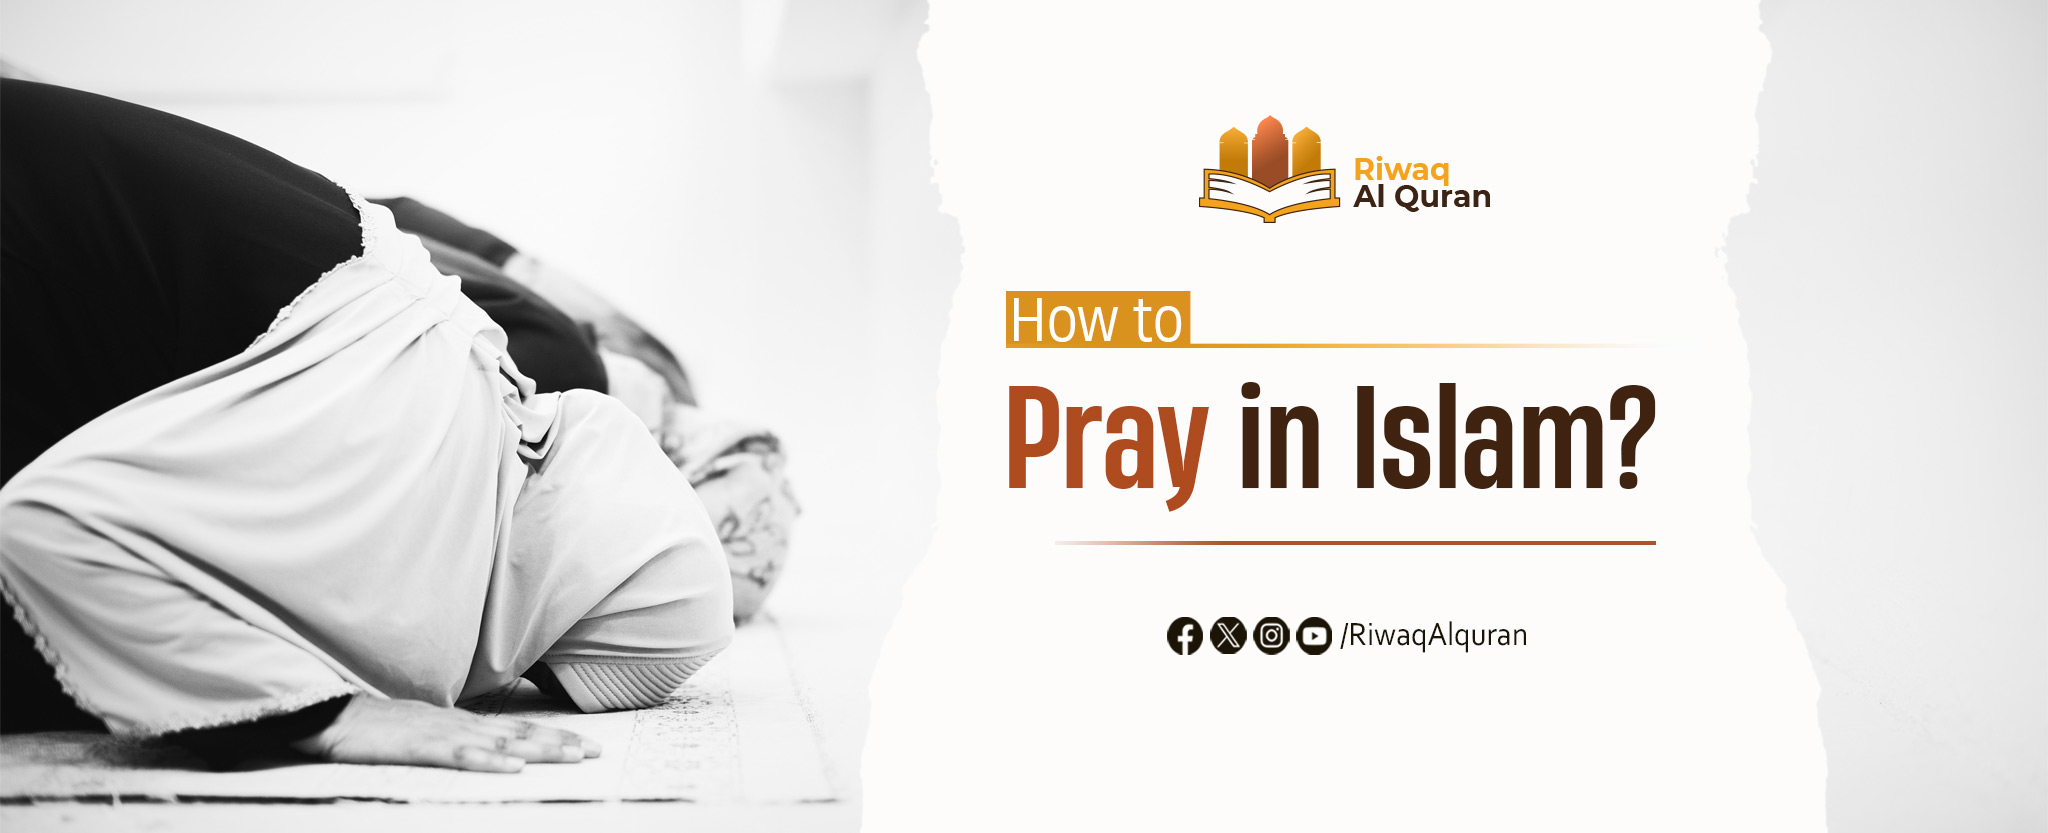 How To Pray in Islam Step-By-Step And What To Say?